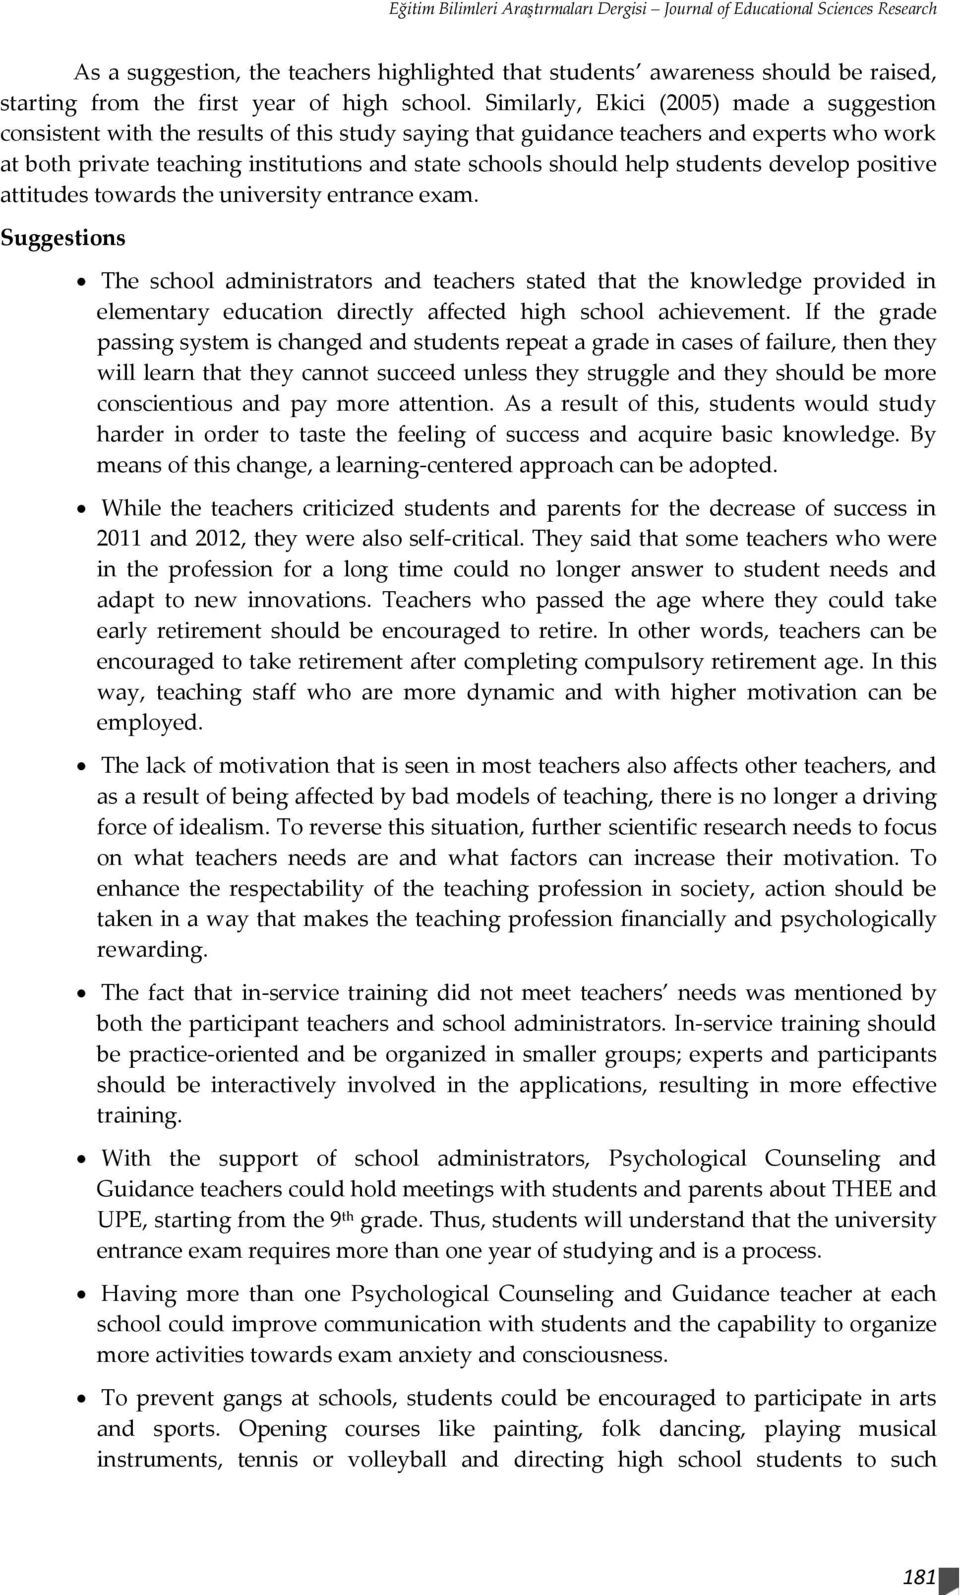 Similarly, Ekici (2005) made a suggestion consistent with the results of this study saying that guidance teachers and experts who work at both private teaching institutions and state schools should